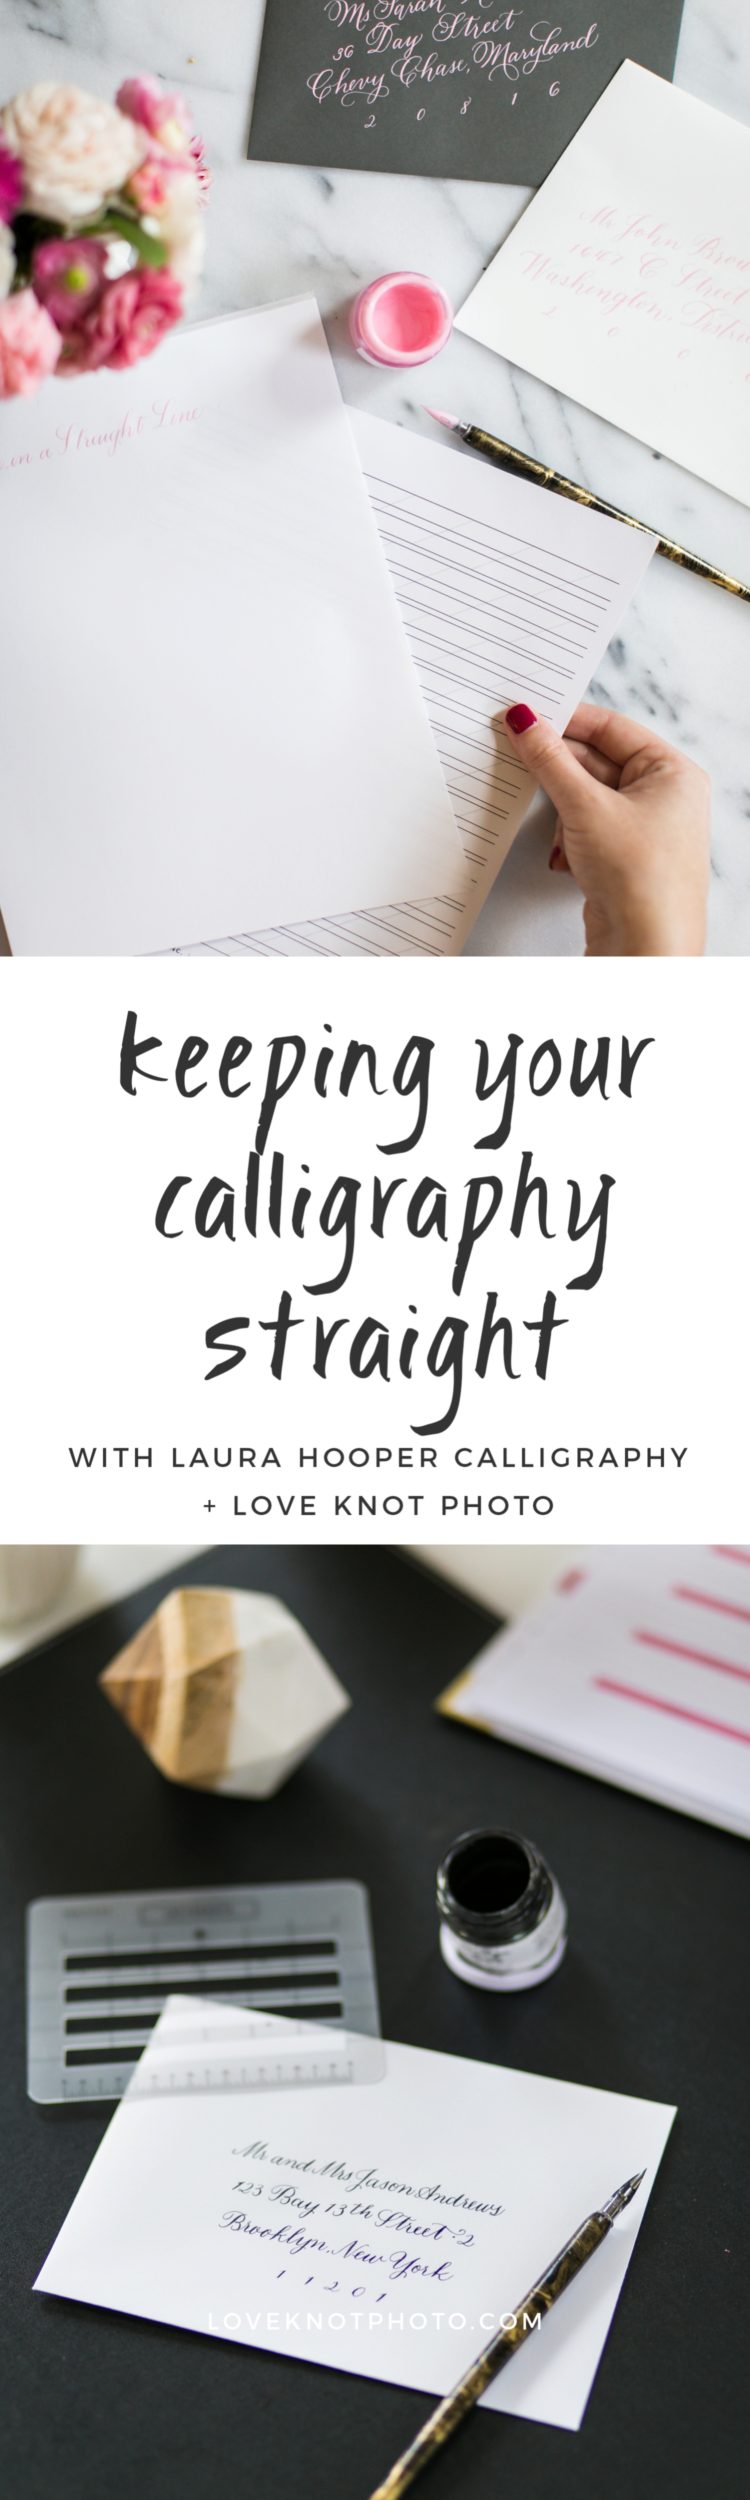 brand photography product photography blog post laura hooper calligraphy love knot photo